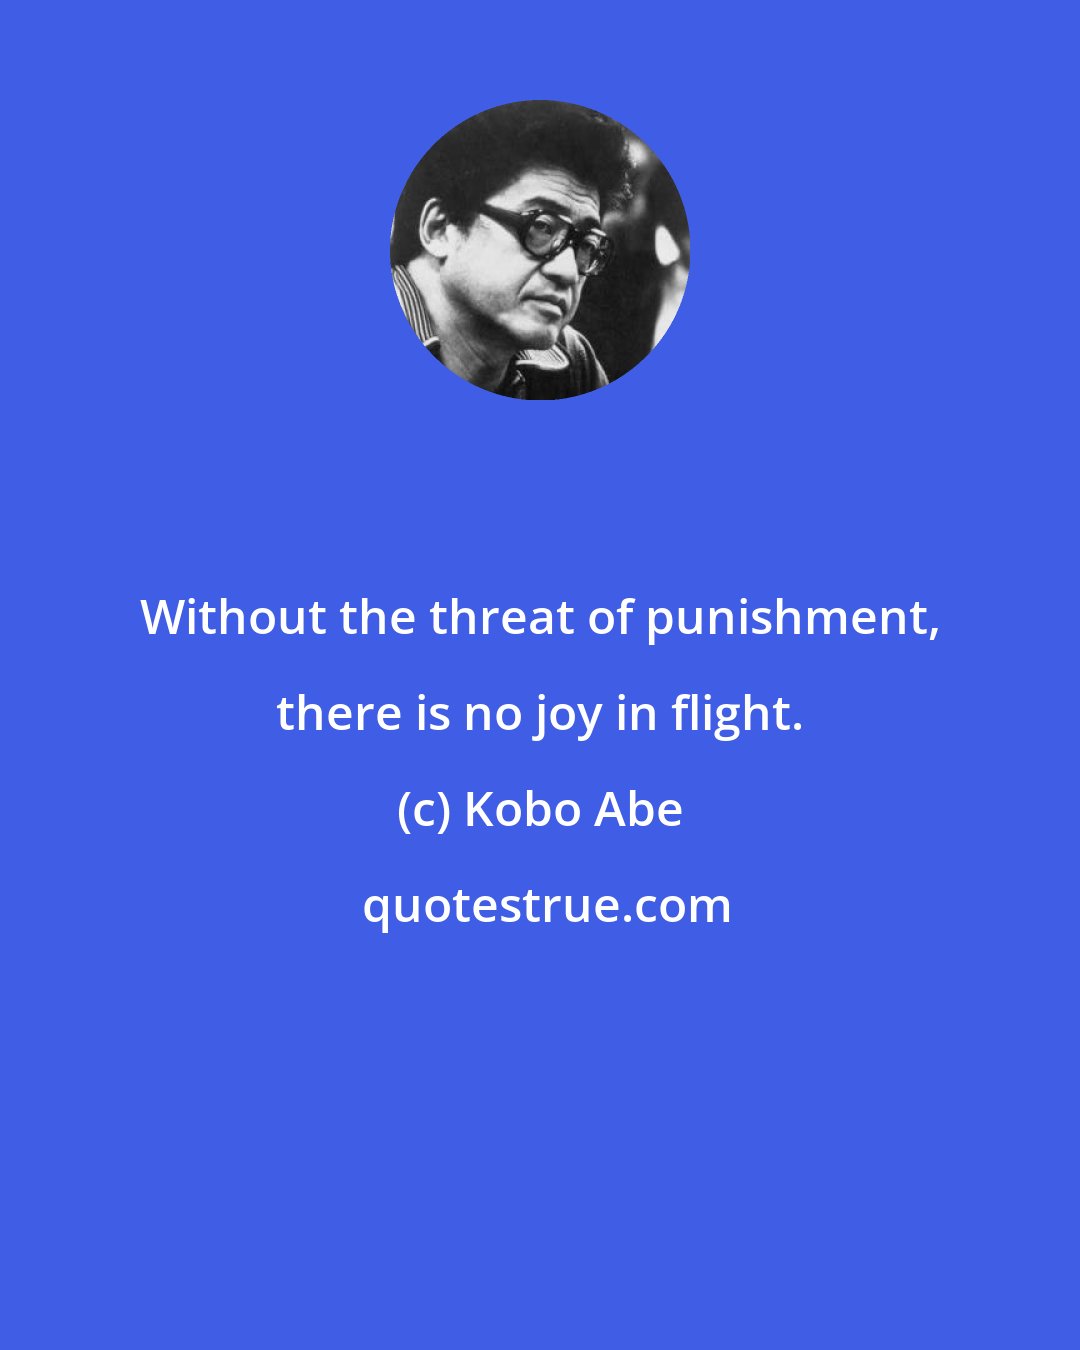 Kobo Abe: Without the threat of punishment, there is no joy in flight.